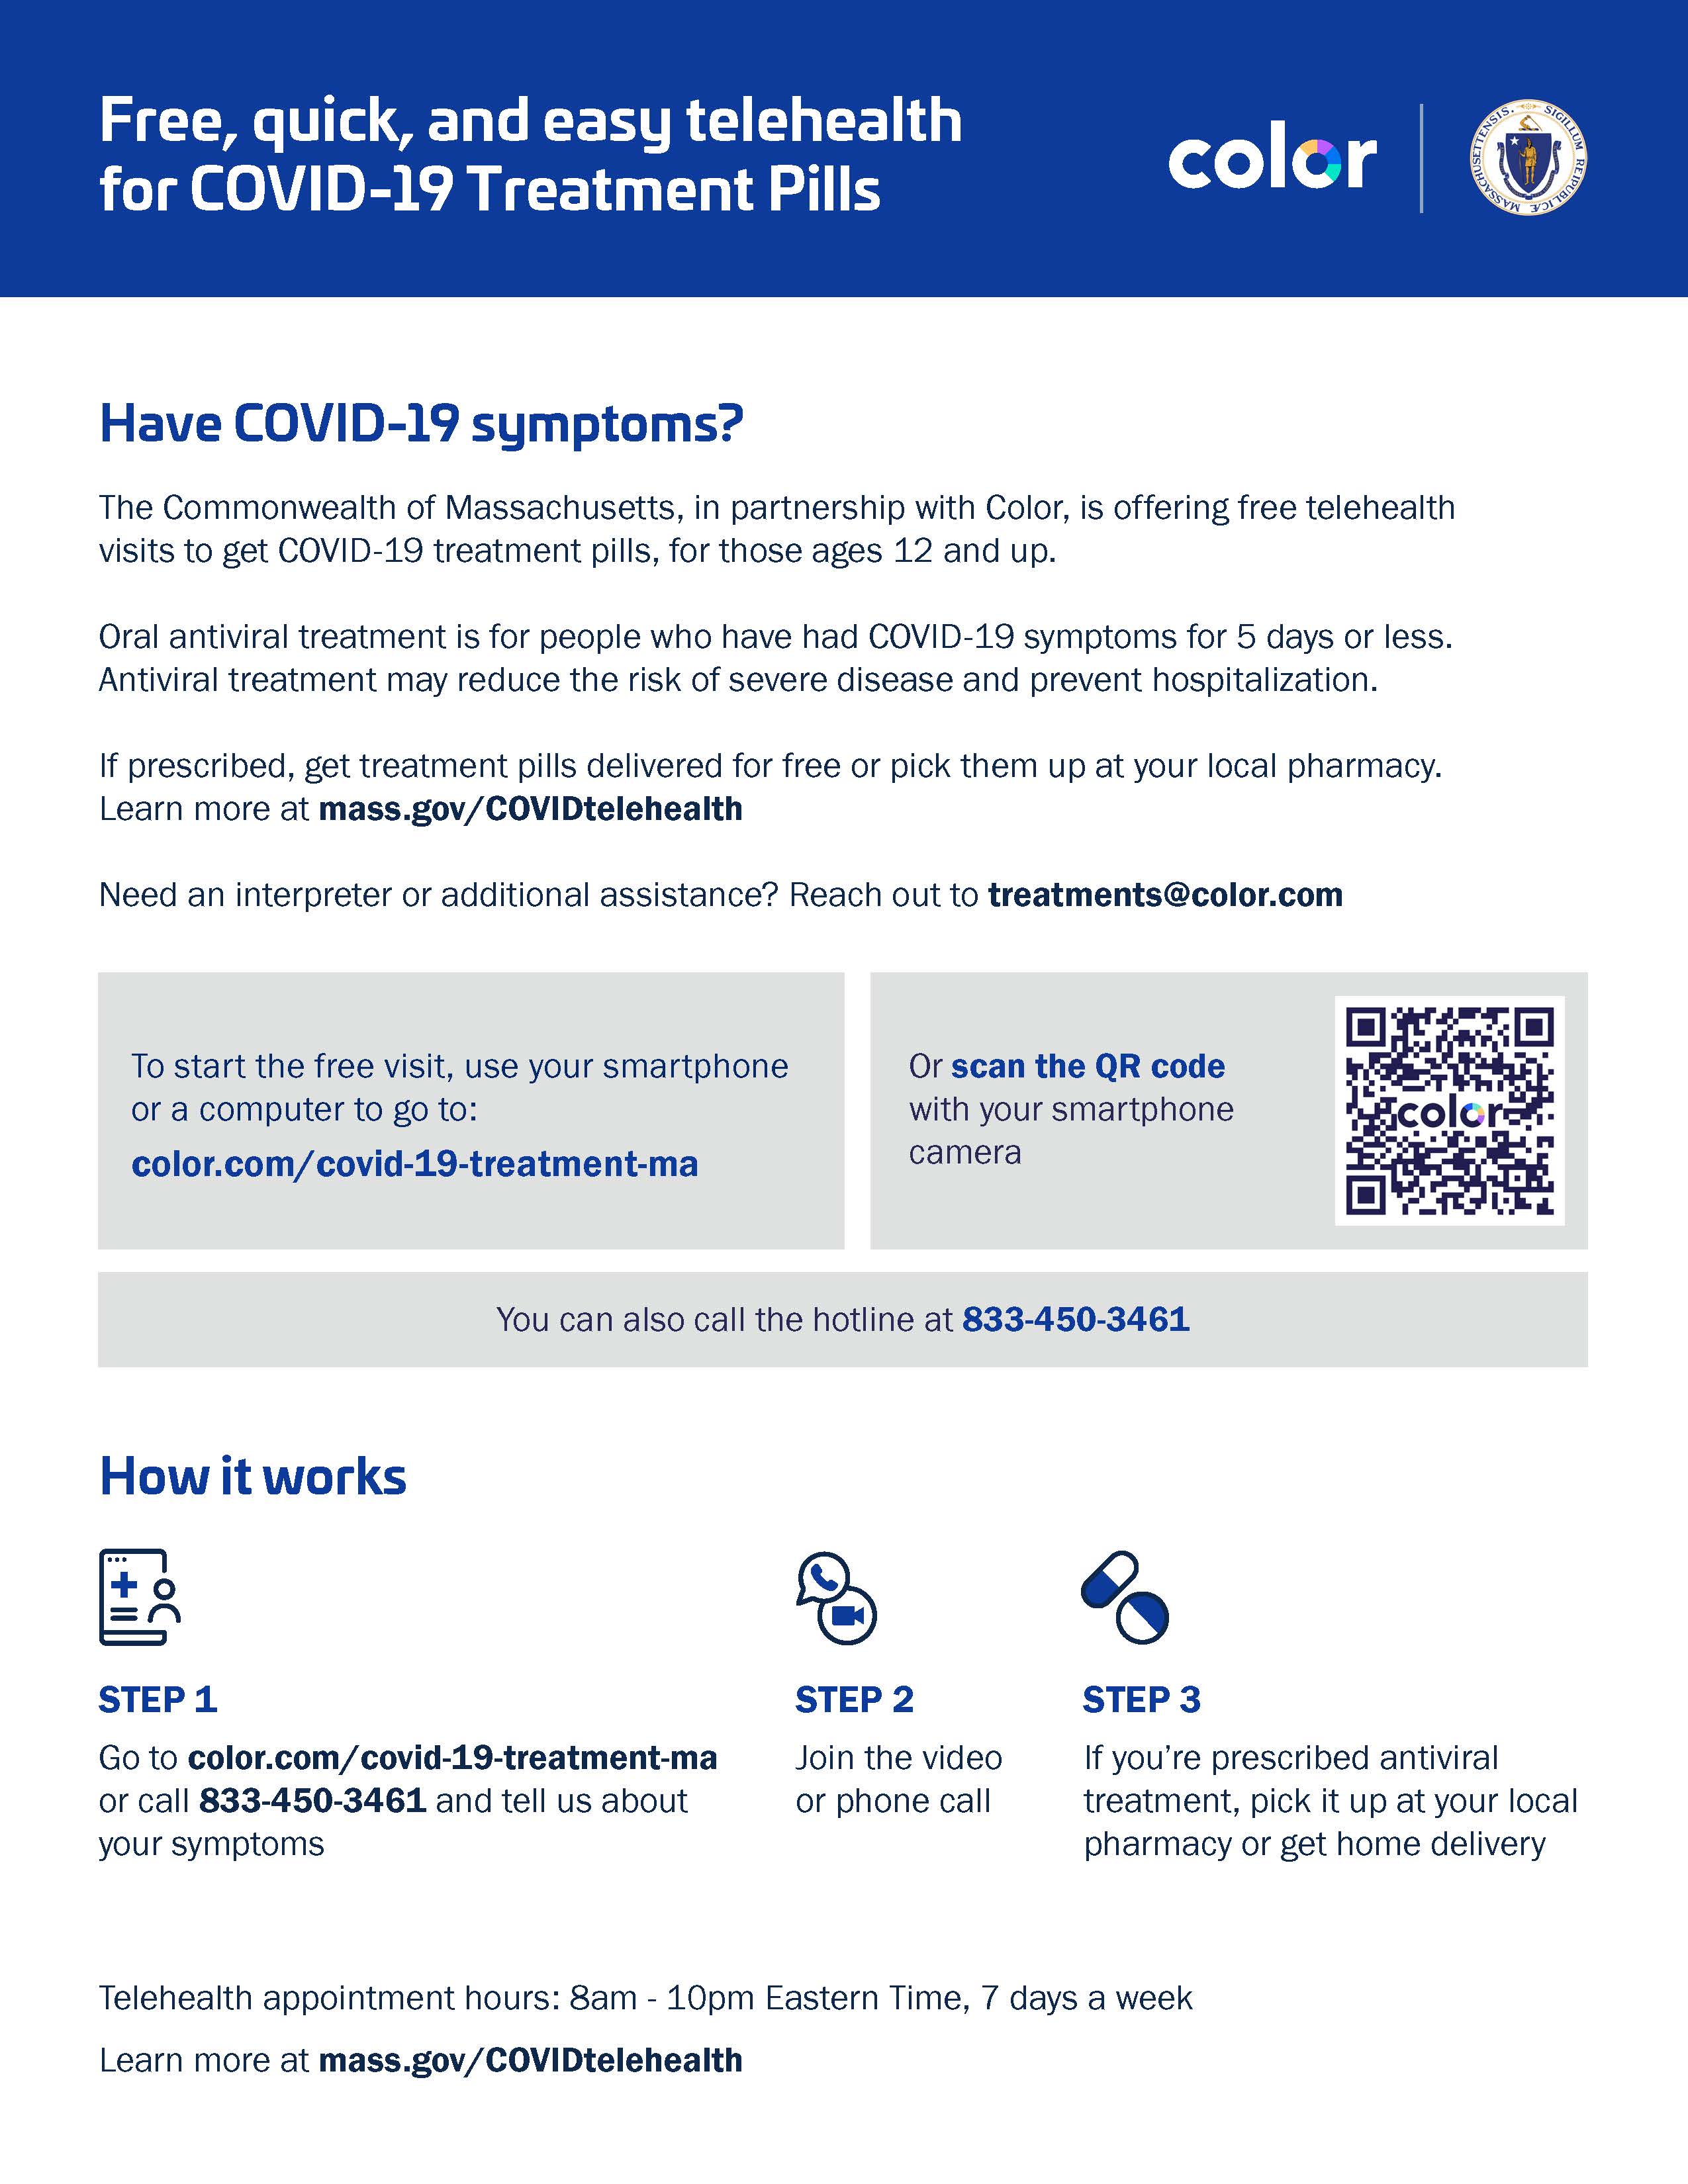 The flyer provides information about free telehealth services for COVID-19 treatment pills, specifically within the Commonwealth of Massachusetts in partnership with Color. It is targeted at individuals aged 12 and older who have COVID-19 symptoms. Here's a summary of the flyer's content:  Title: "Free, quick, and easy telehealth for COVID-19 Treatment Pills" If you have COVID-19 symptoms, you can get a free telehealth visit to obtain COVID-19 treatment pills. Oral antiviral treatment is suitable for those with symptoms for 5 days or less, which may reduce the risk of severe disease and prevent hospitalization. Pills can be delivered for free or picked up at a local pharmacy if prescribed. For more information or additional assistance, the flyer directs to mass.gov/COVIDtelehealth or treatments@color.com. To start the free visit, you can use a smartphone or computer to visit color.com/covid-19-treatment-ma or scan the QR code provided. A hotline is also available at 833-450-3461. The flyer explains the process in three steps: Step 1: Go to the website or call the hotline and describe your symptoms. Step 2: Join the video or phone call for the consultation. Step 3: If prescribed antiviral treatment, pick it up at a pharmacy or opt for home delivery. Telehealth appointments are available from 8 am to 10 pm Eastern Time, seven days a week. The design includes the logo of Color and the seal of the Commonwealth of Massachusetts